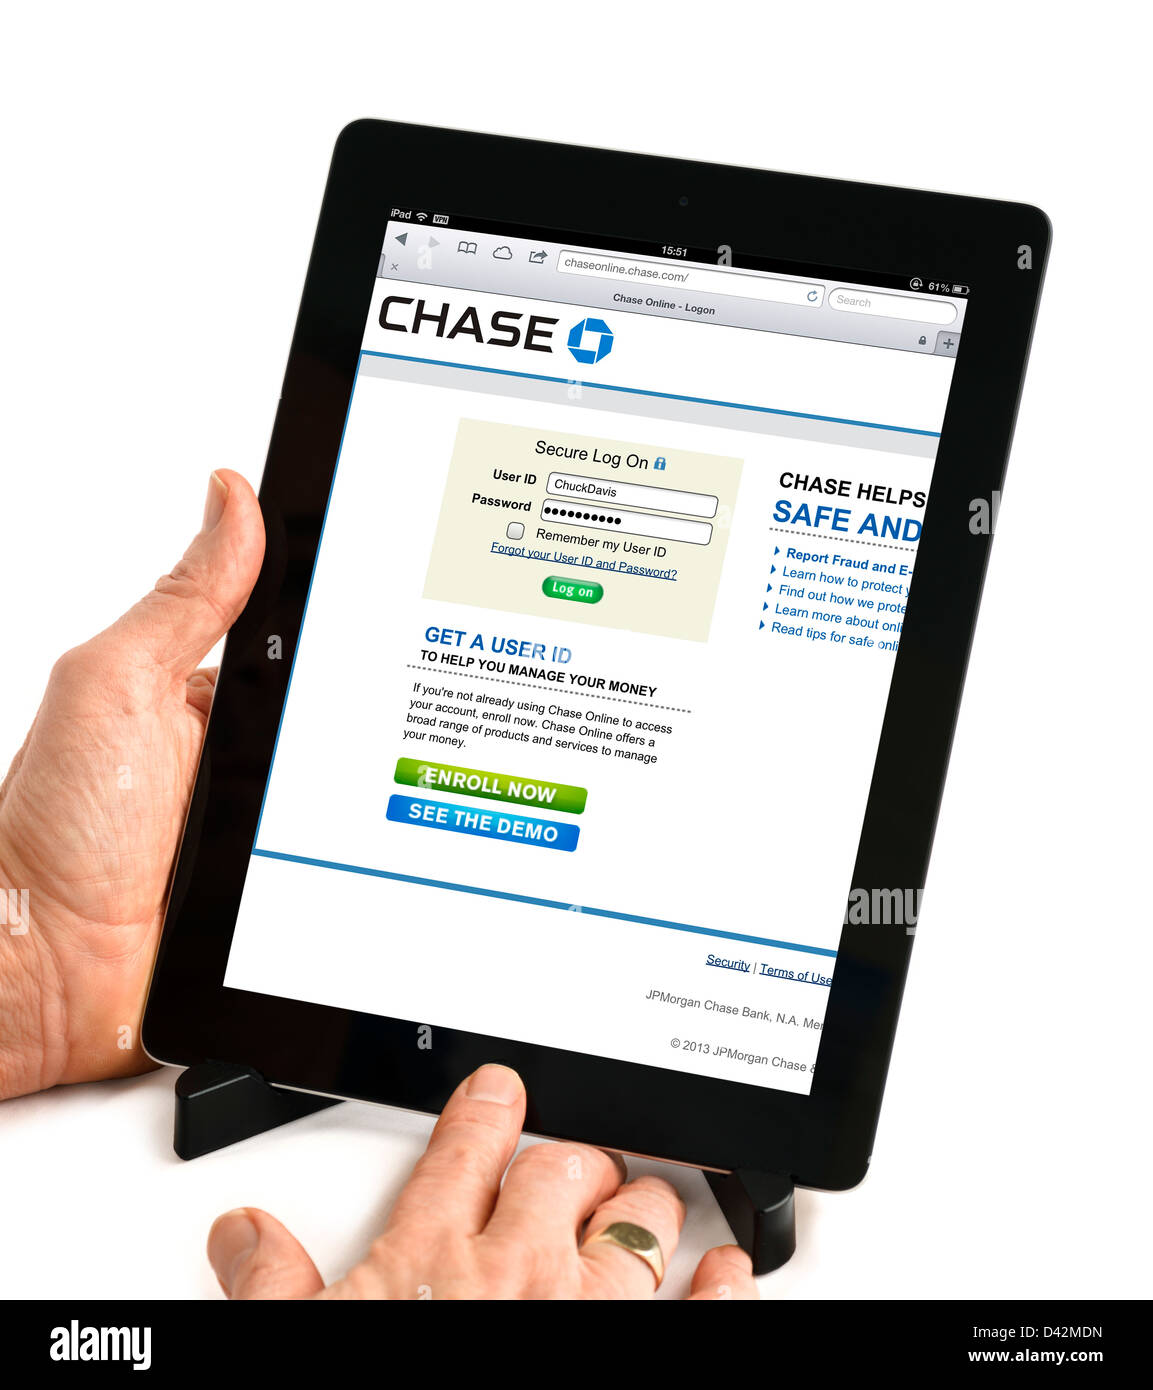 Logging on to a Chase bank account on an iPad 4, USA Stock Photo